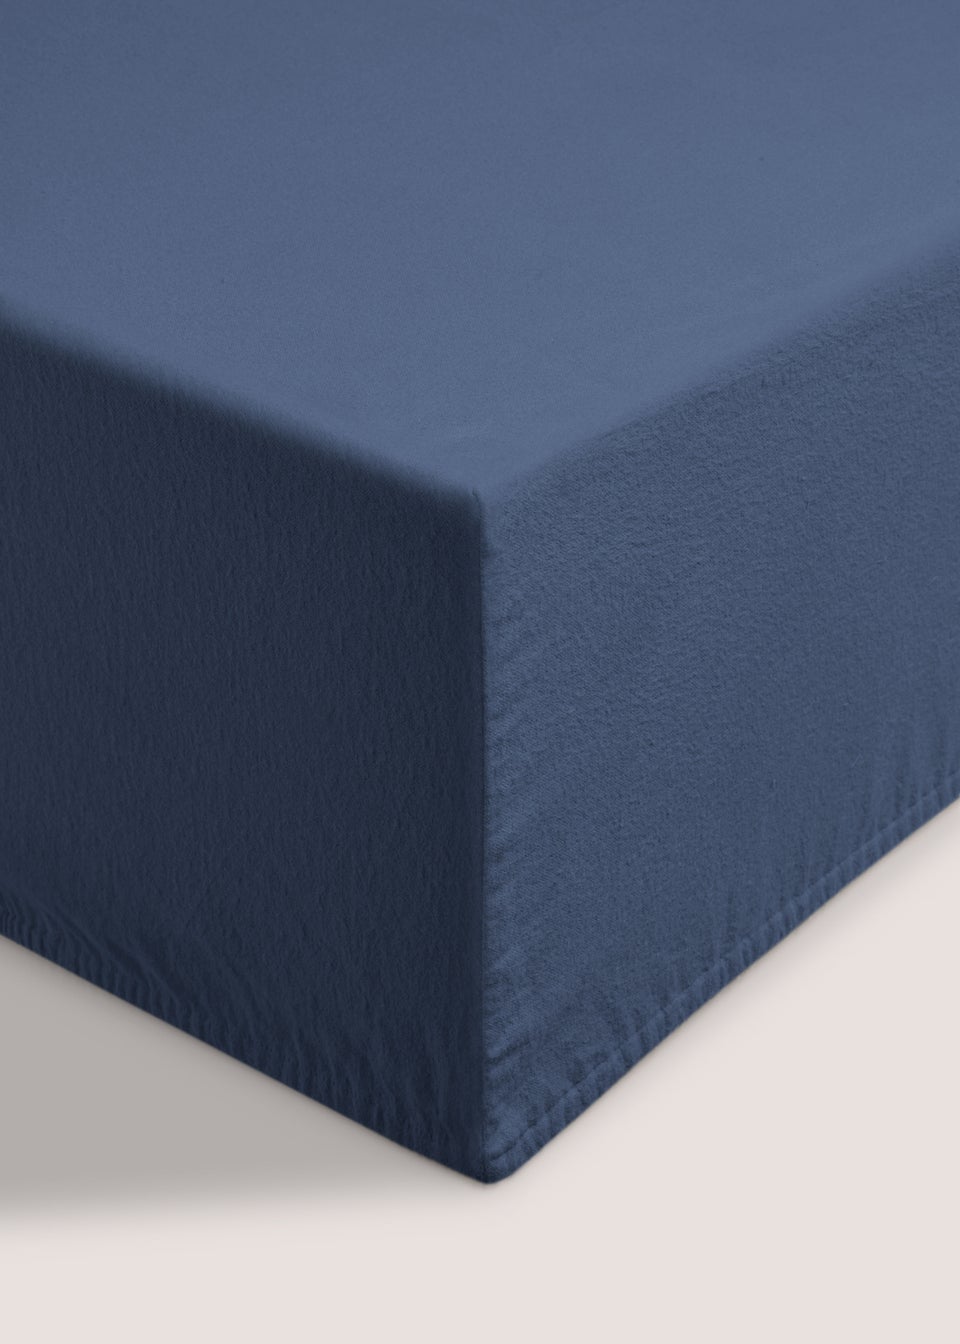 Navy  Extra Deep Bed Sheet (180 Thread Count)